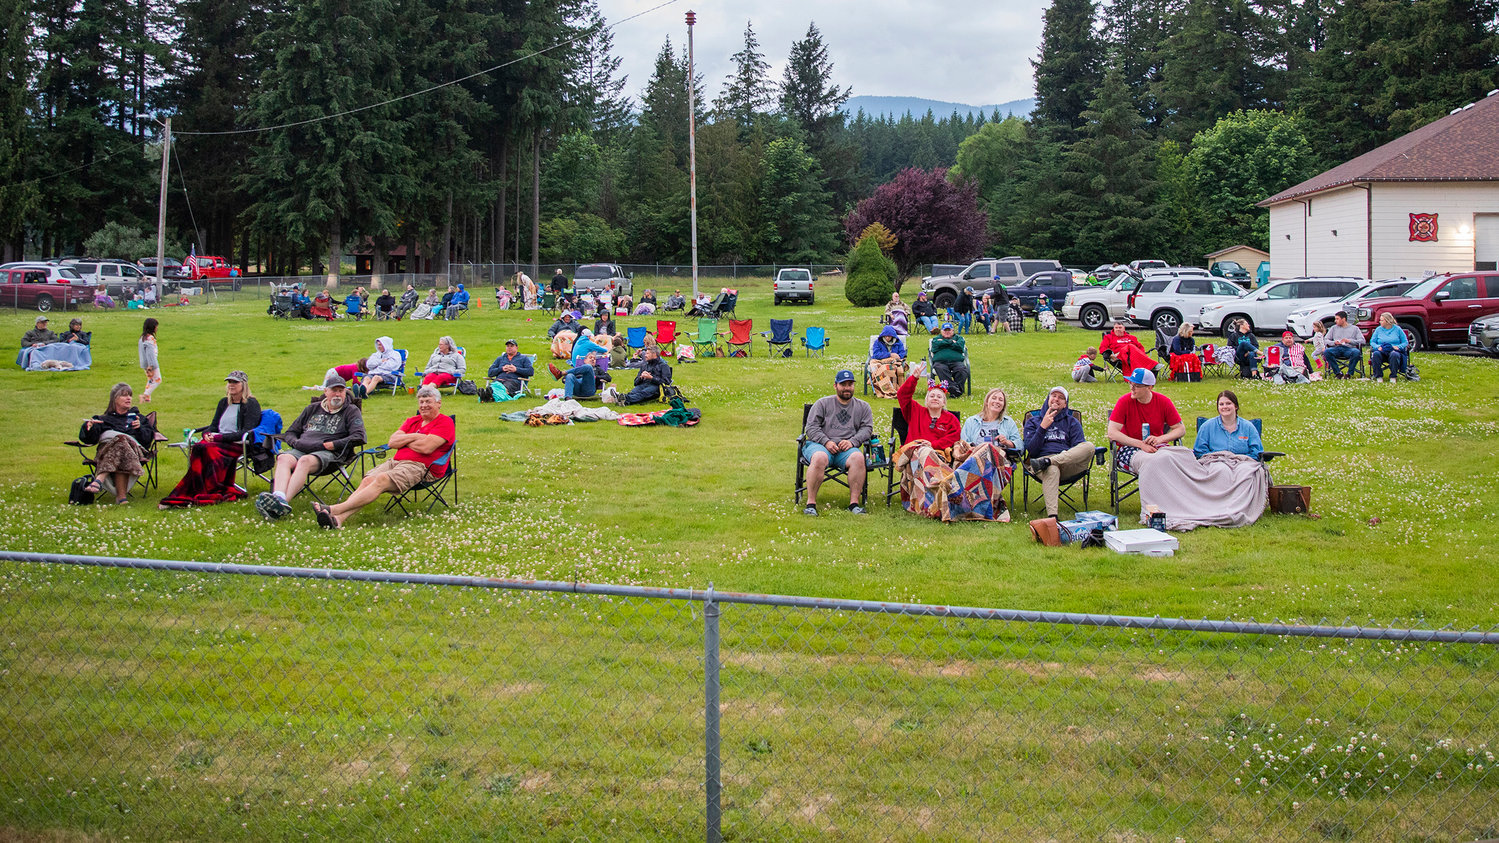 Visitors gather at dusk to watch a firework show put on by Lonnie Goble, the Packwood Fire Department and community donations.